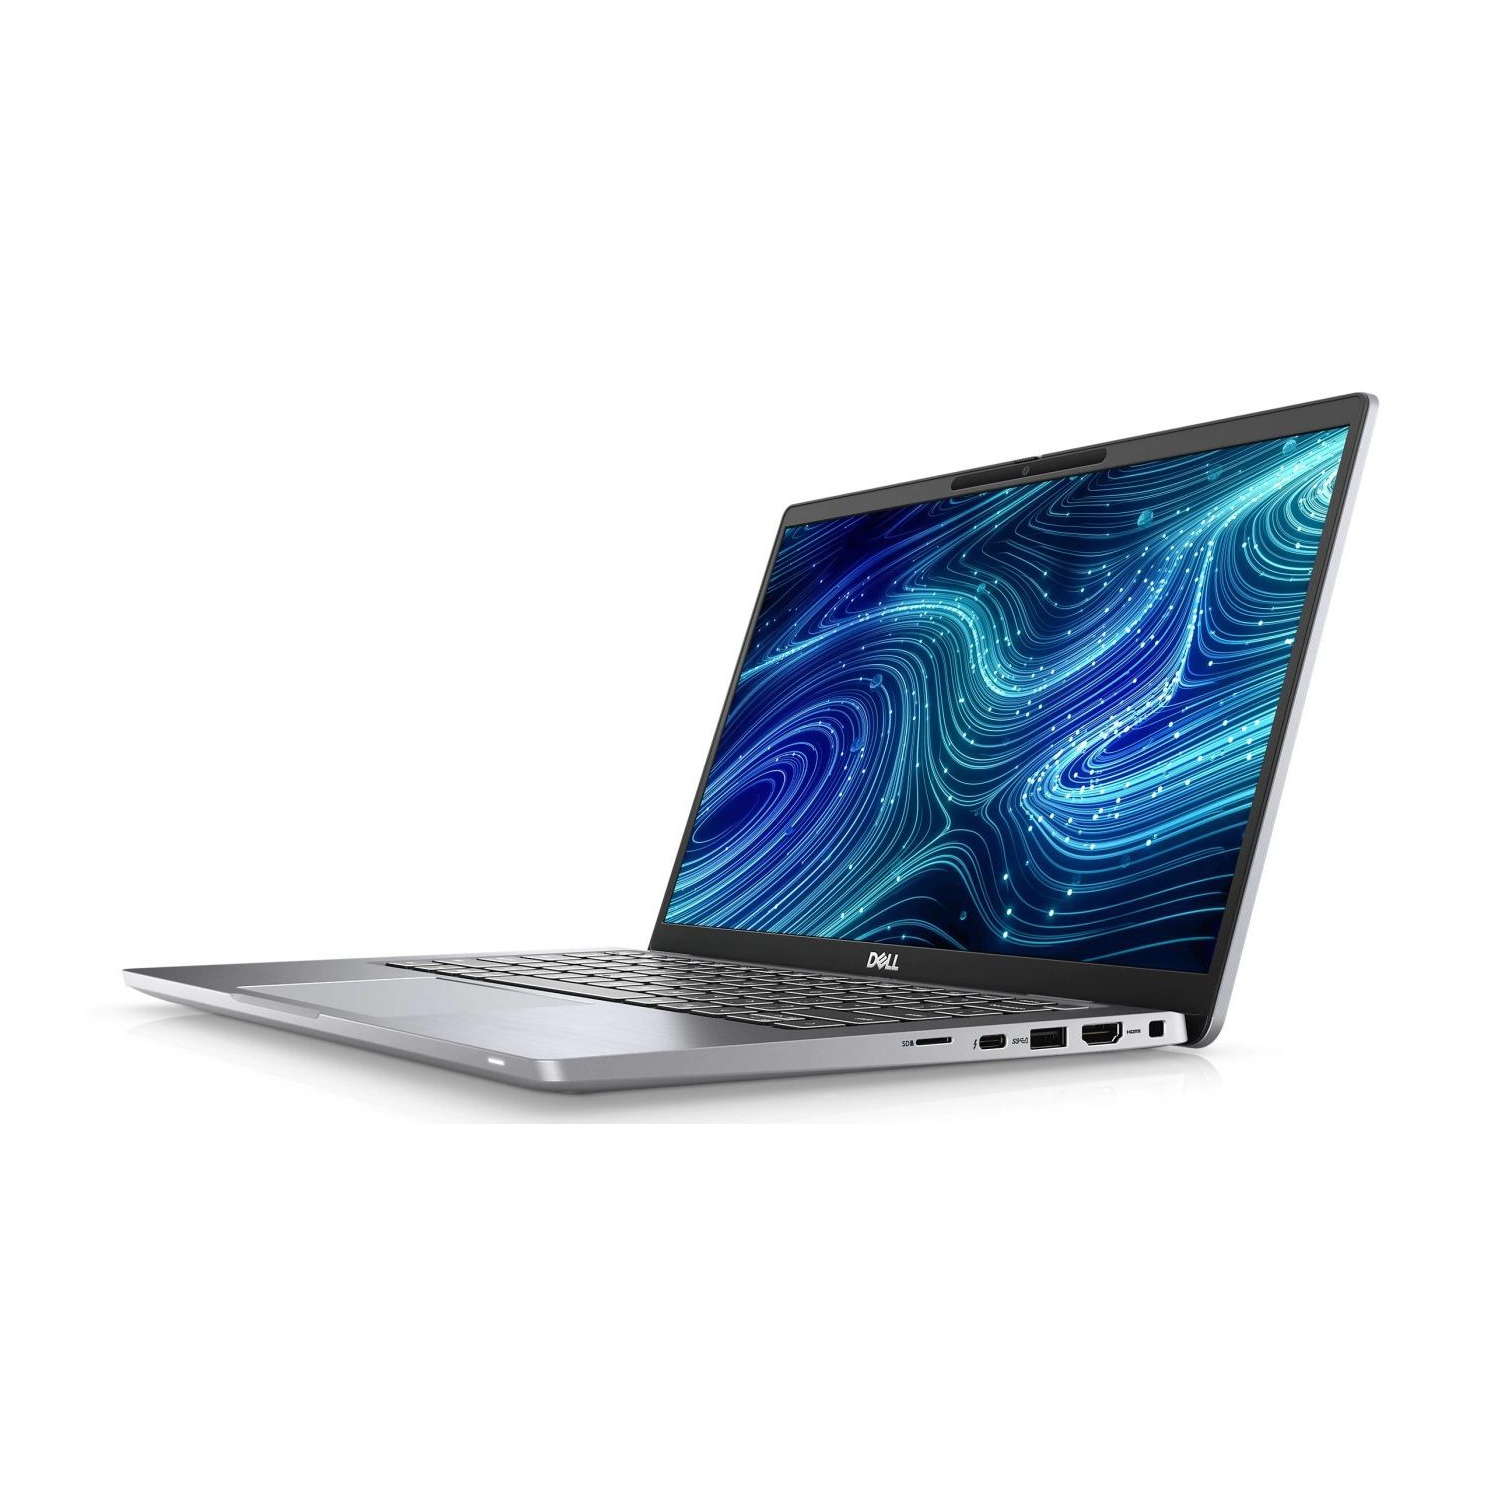 Refurbished (Excellent) - Dell Latitude 7000 7420 Laptop (2021) | 14" FHD | Core i5 - 256GB SSD - 16GB RAM | 4 Cores @ 4.4 GHz - 11th Gen CPU Certified Refurbished